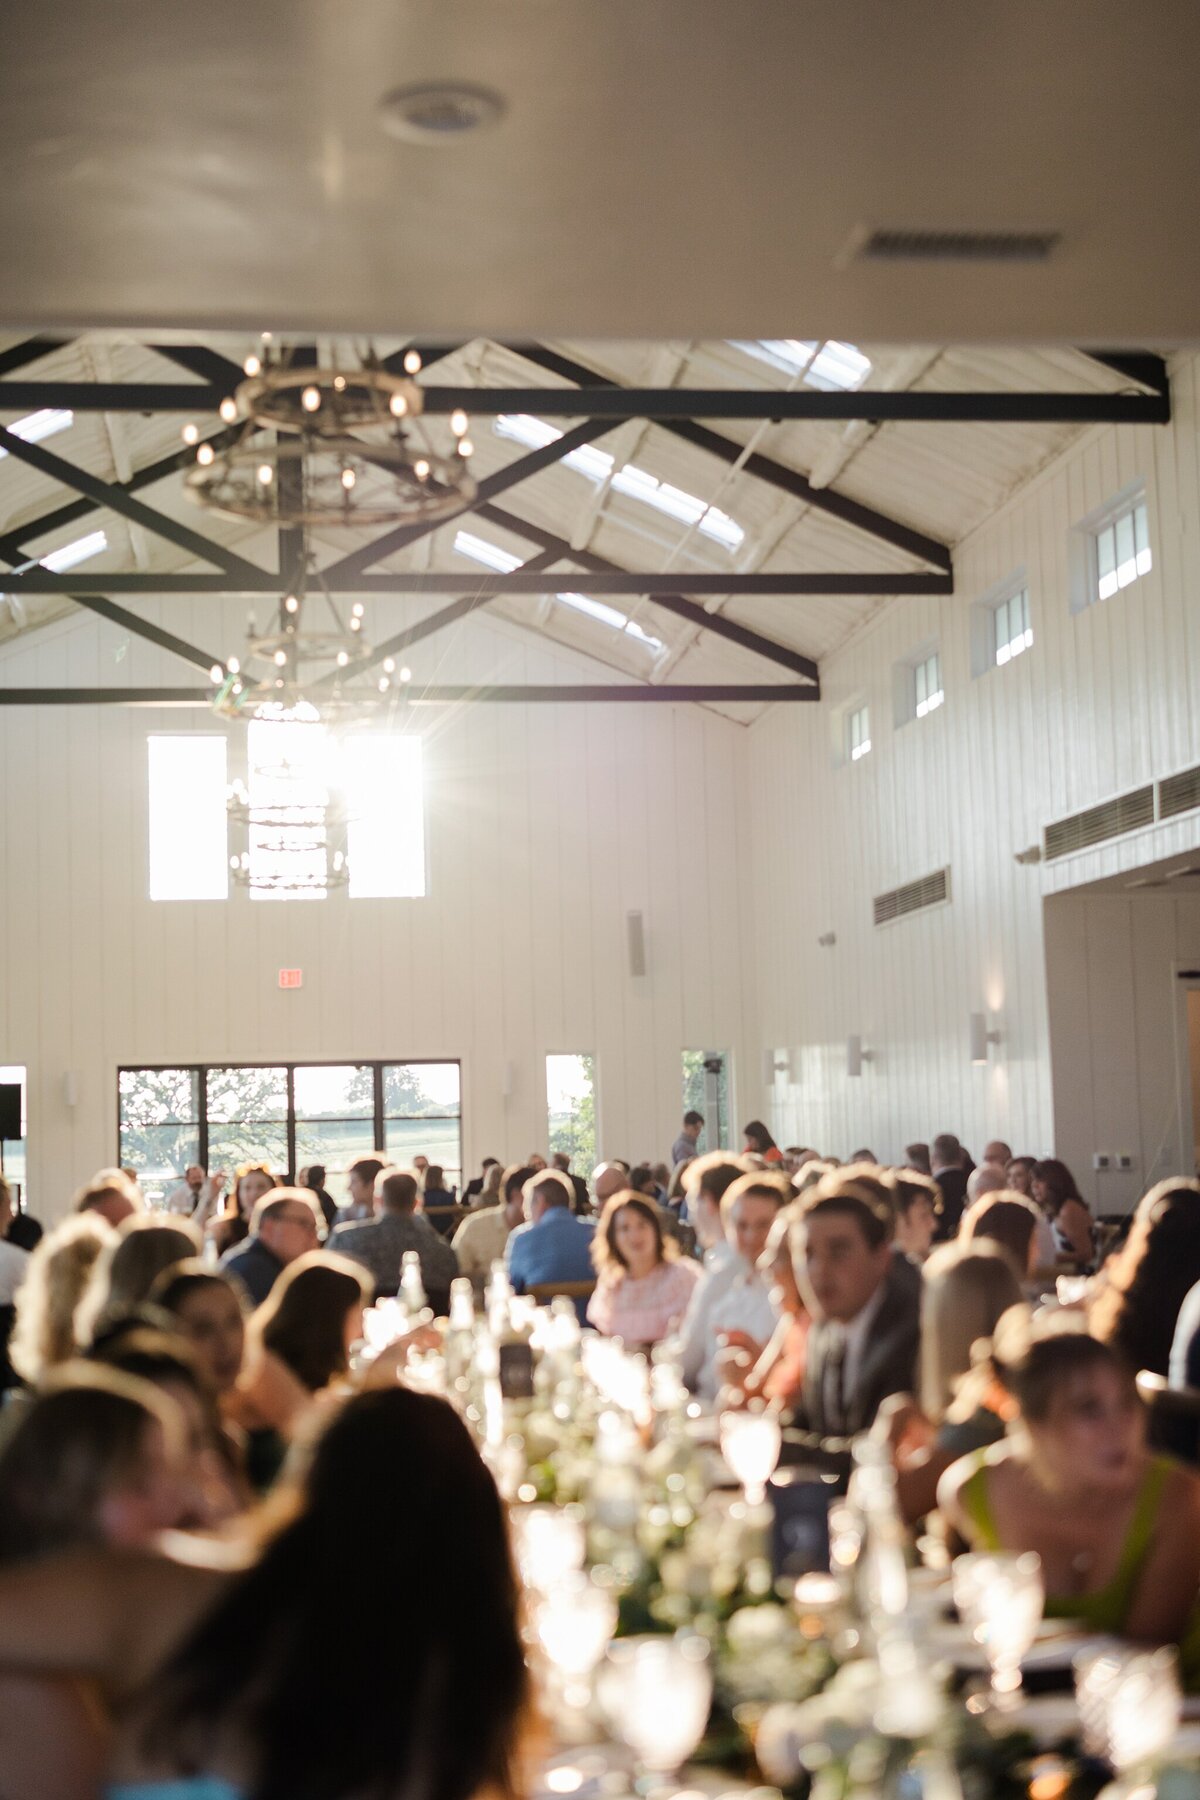 A candid shot of all the wedding guests at a wedding reception at Bella Cavalli Events in Aubrey, Texas.  Guests can be seen at many tables all socializing and preparing to eat dinner and celebrate the couple and their day.